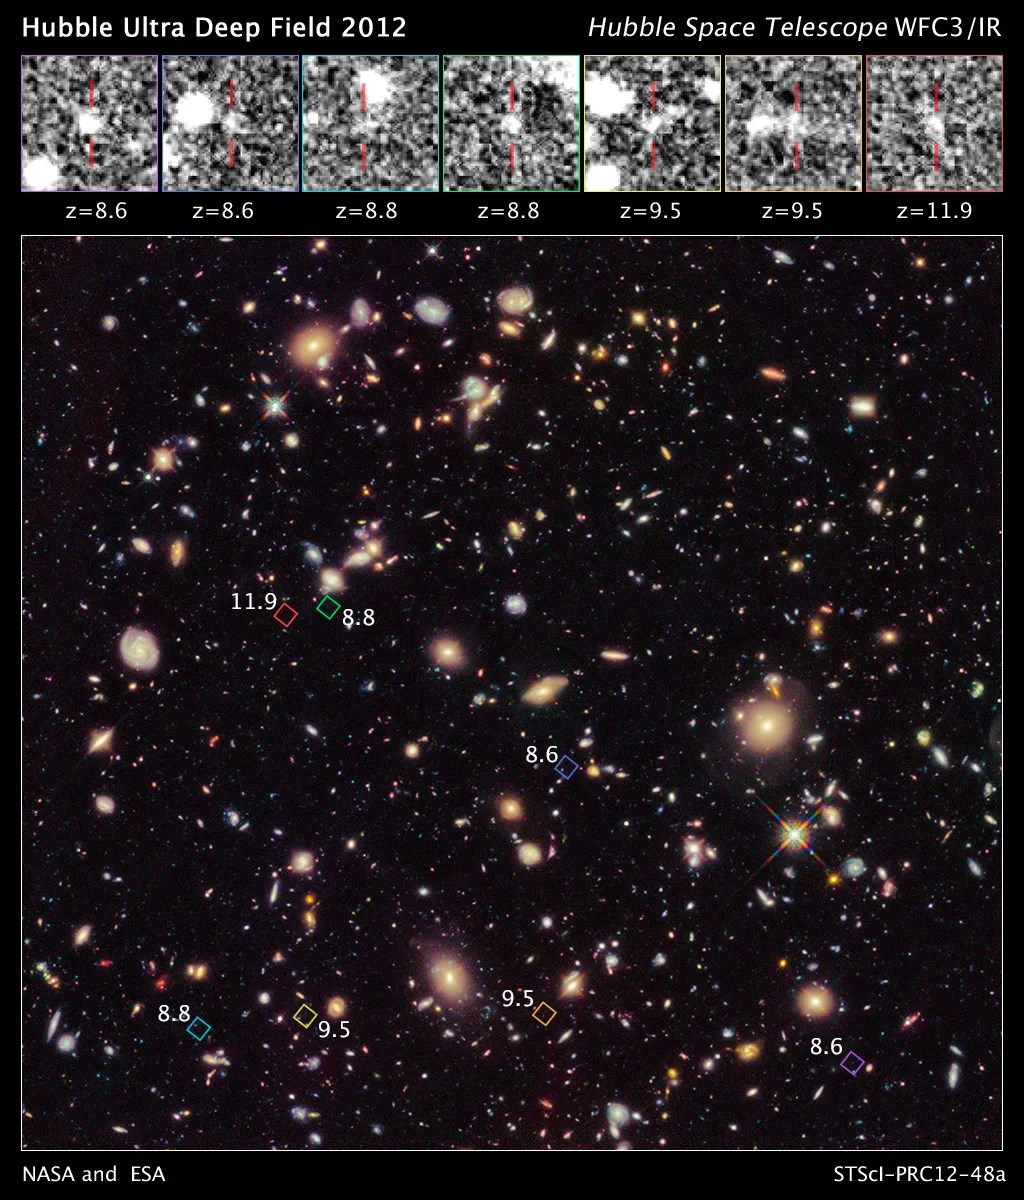 This new image of the Hubble Ultra Deep Field 2012 campaign reveals a previously unseen population of seven faraway galaxies.